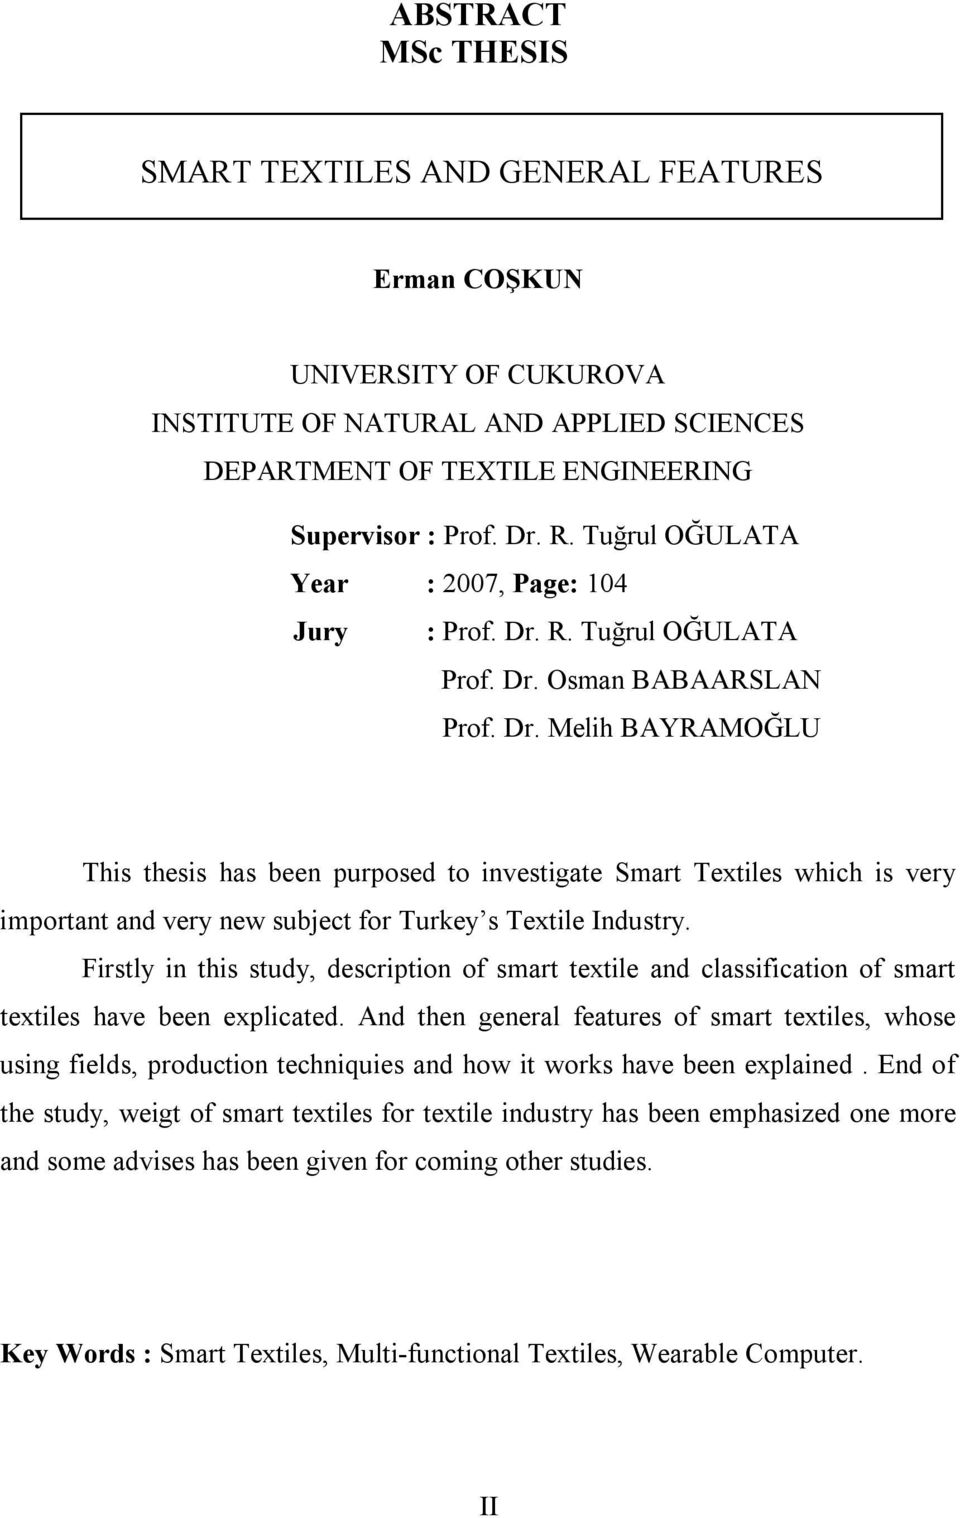 R. Tuğrul OĞULATA Prof. Dr. Osman BABAARSLAN Prof. Dr. Melih BAYRAMOĞLU This thesis has been purposed to investigate Smart Textiles which is very important and very new subject for Turkey s Textile Industry.